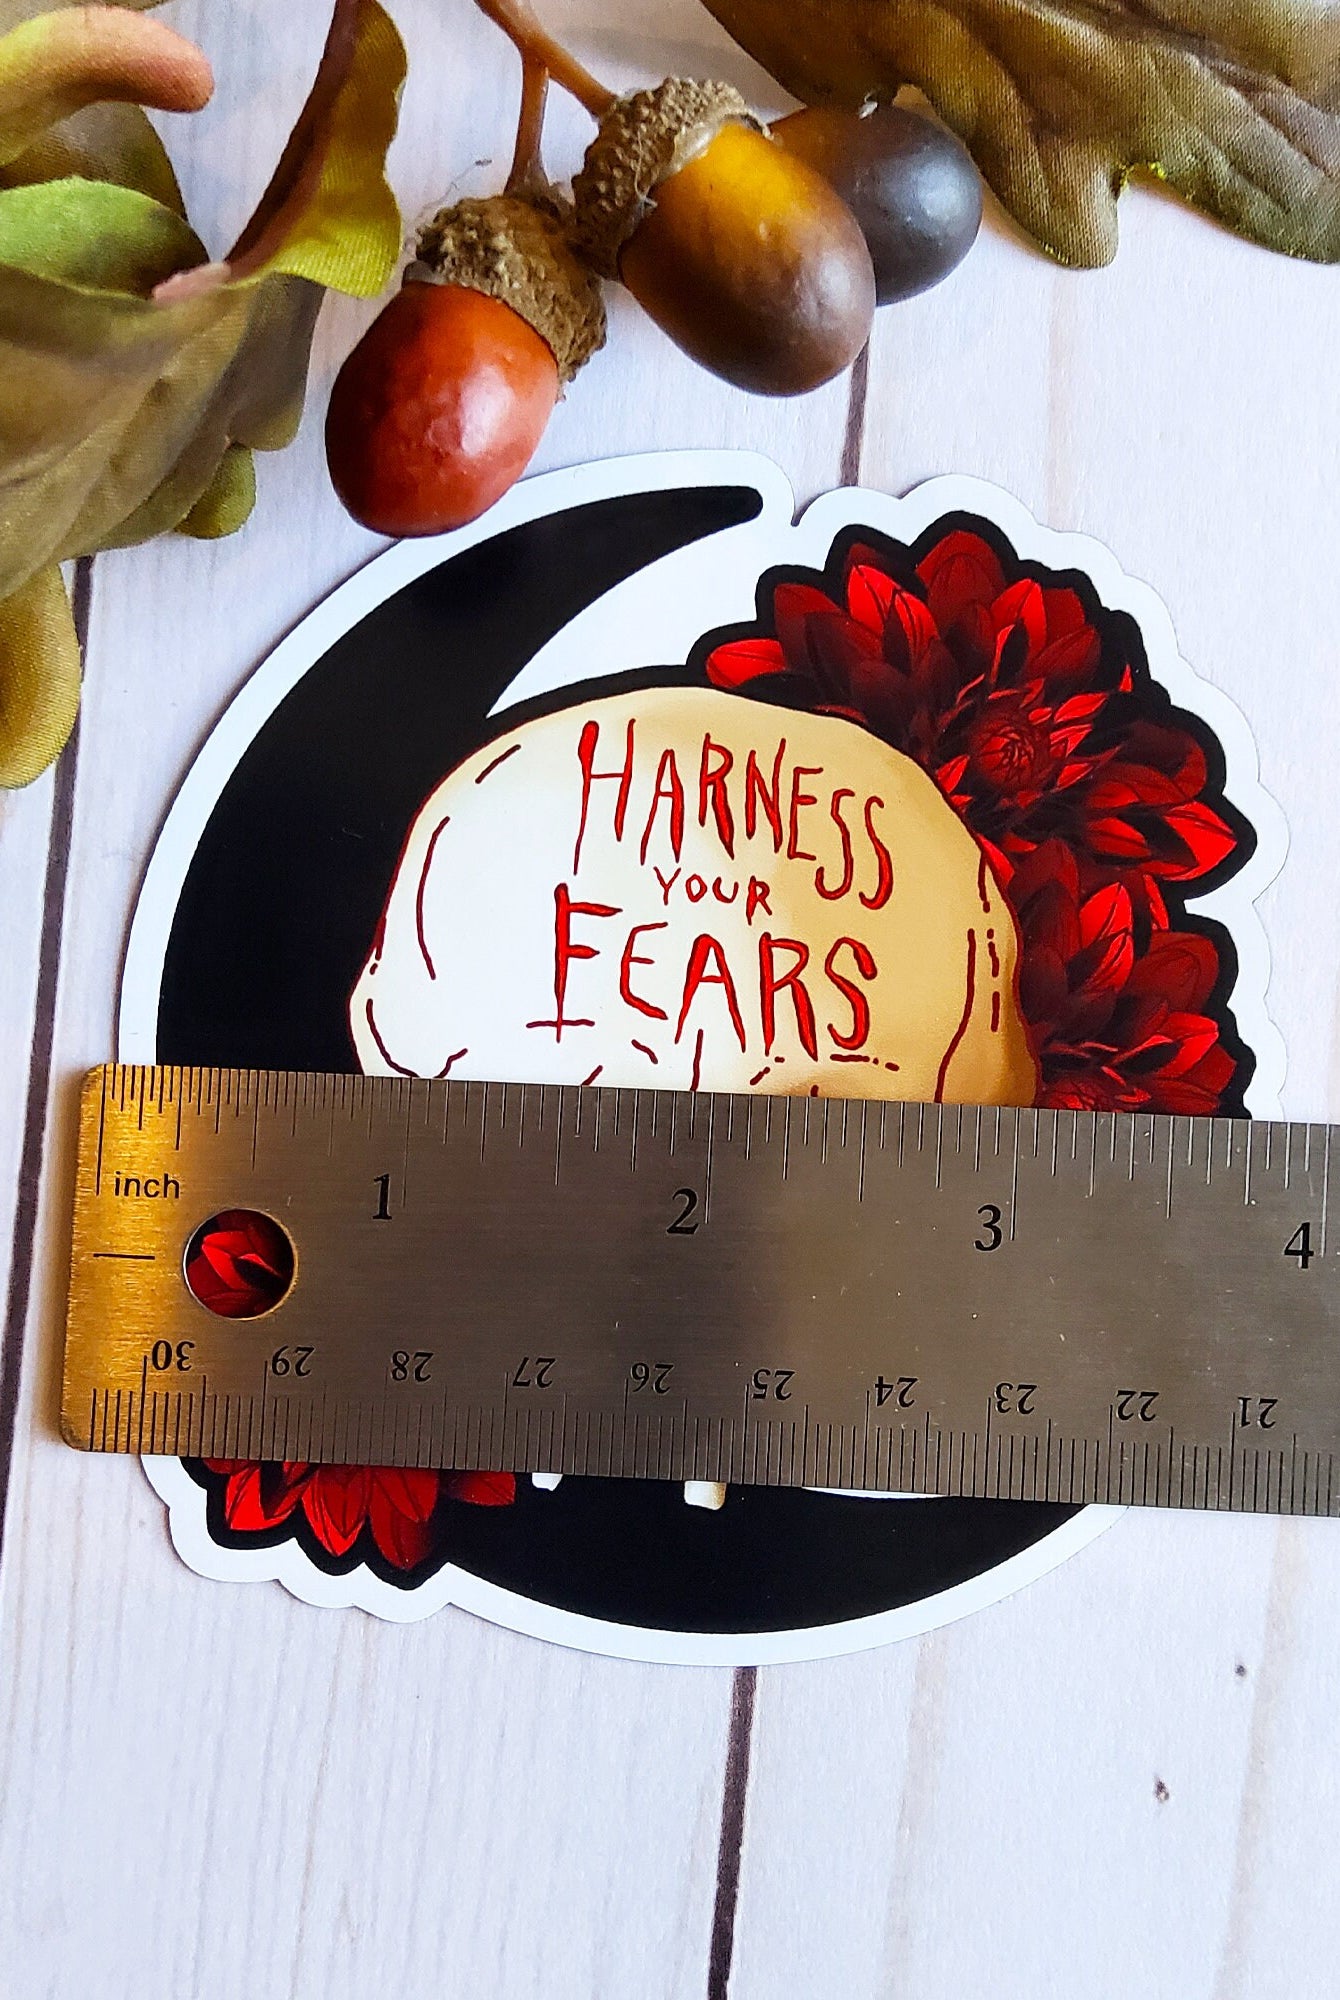 MAGNET: Harness Your Fears Skull Decorative , Harness Your Fears Magnet , Skull Magnet , Fears Magnet , Skull Art Decorative Magnet